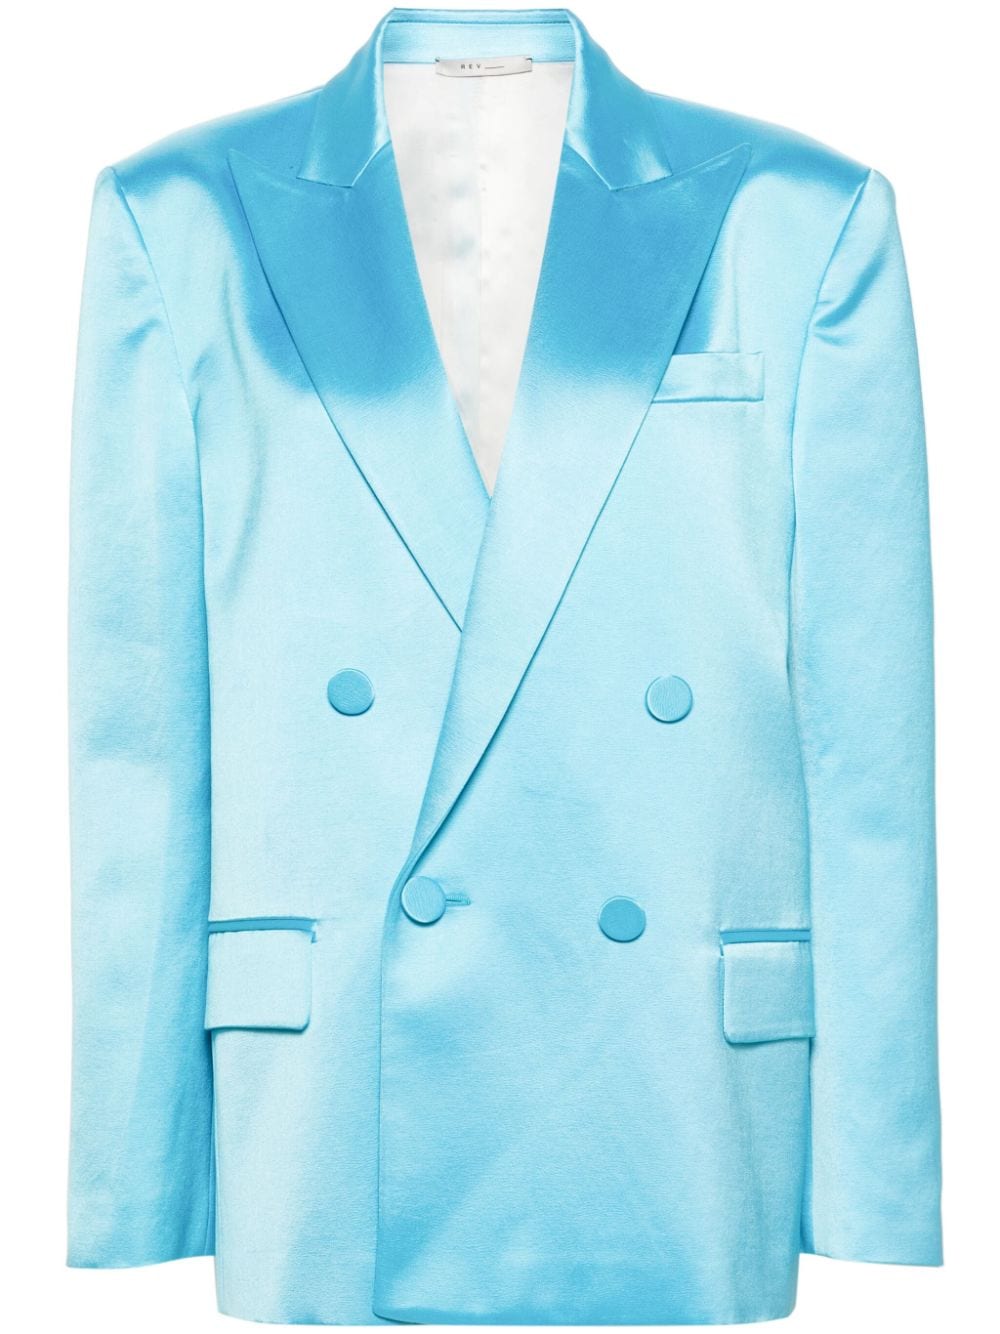 REV The Nixie double-breasted blazer - Blue